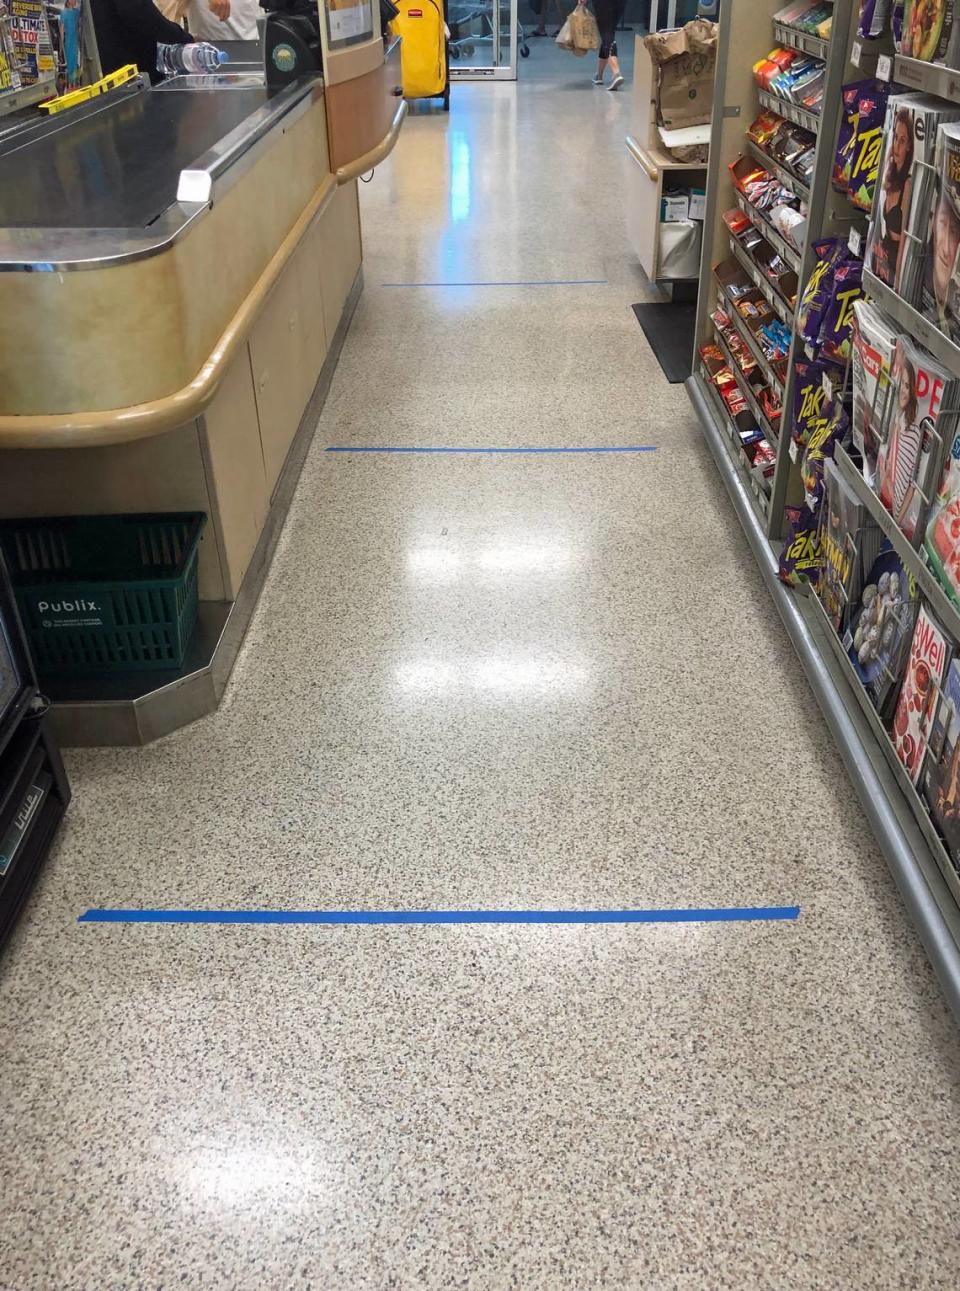 Blue tape on the floor shows shoppers how far each person should be from the next.